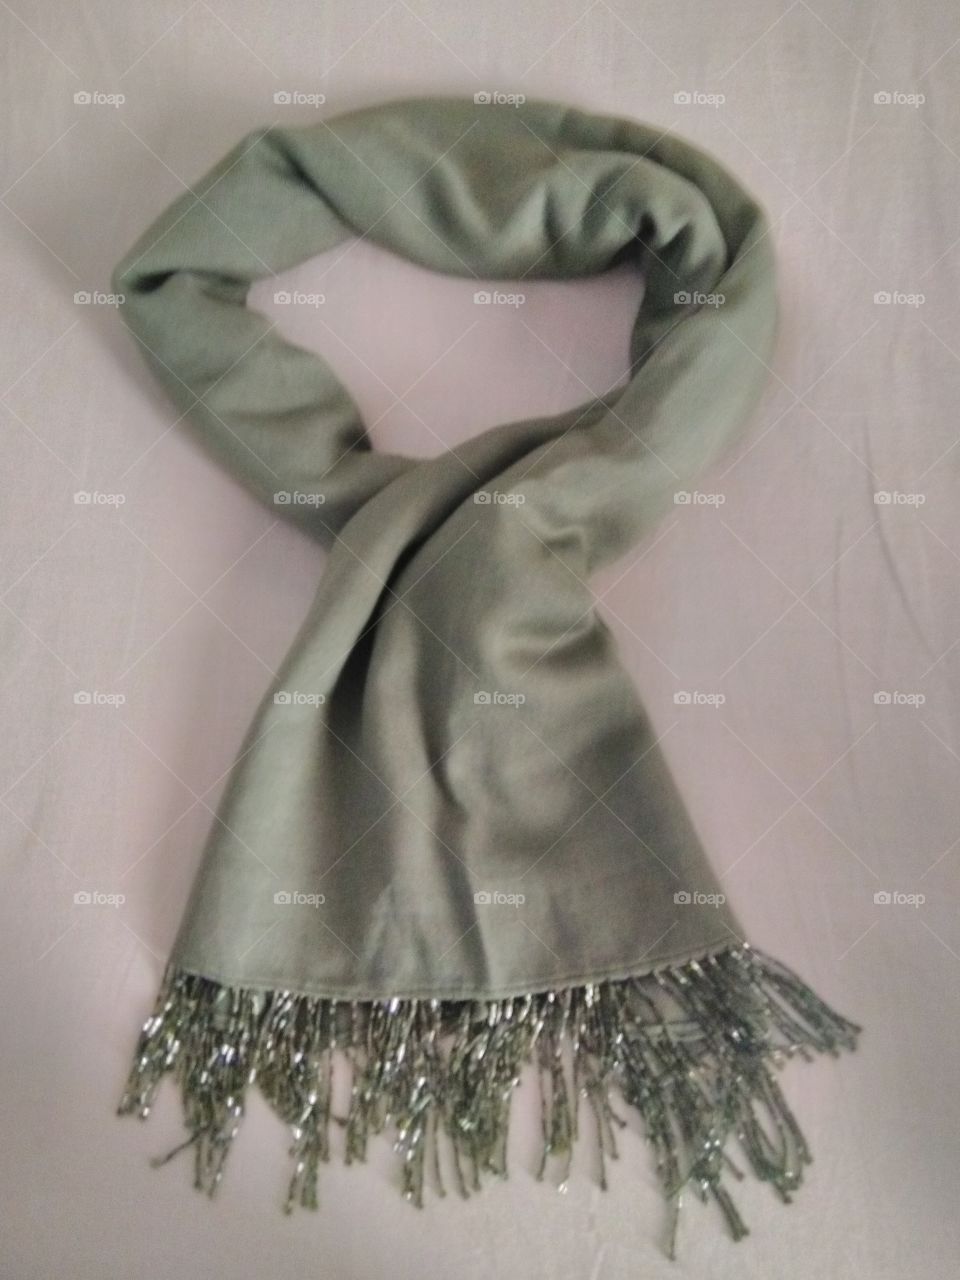 This photo shows a beautiful jungle green scarf with a beaded finishing. It can be worn with official or casual attires.